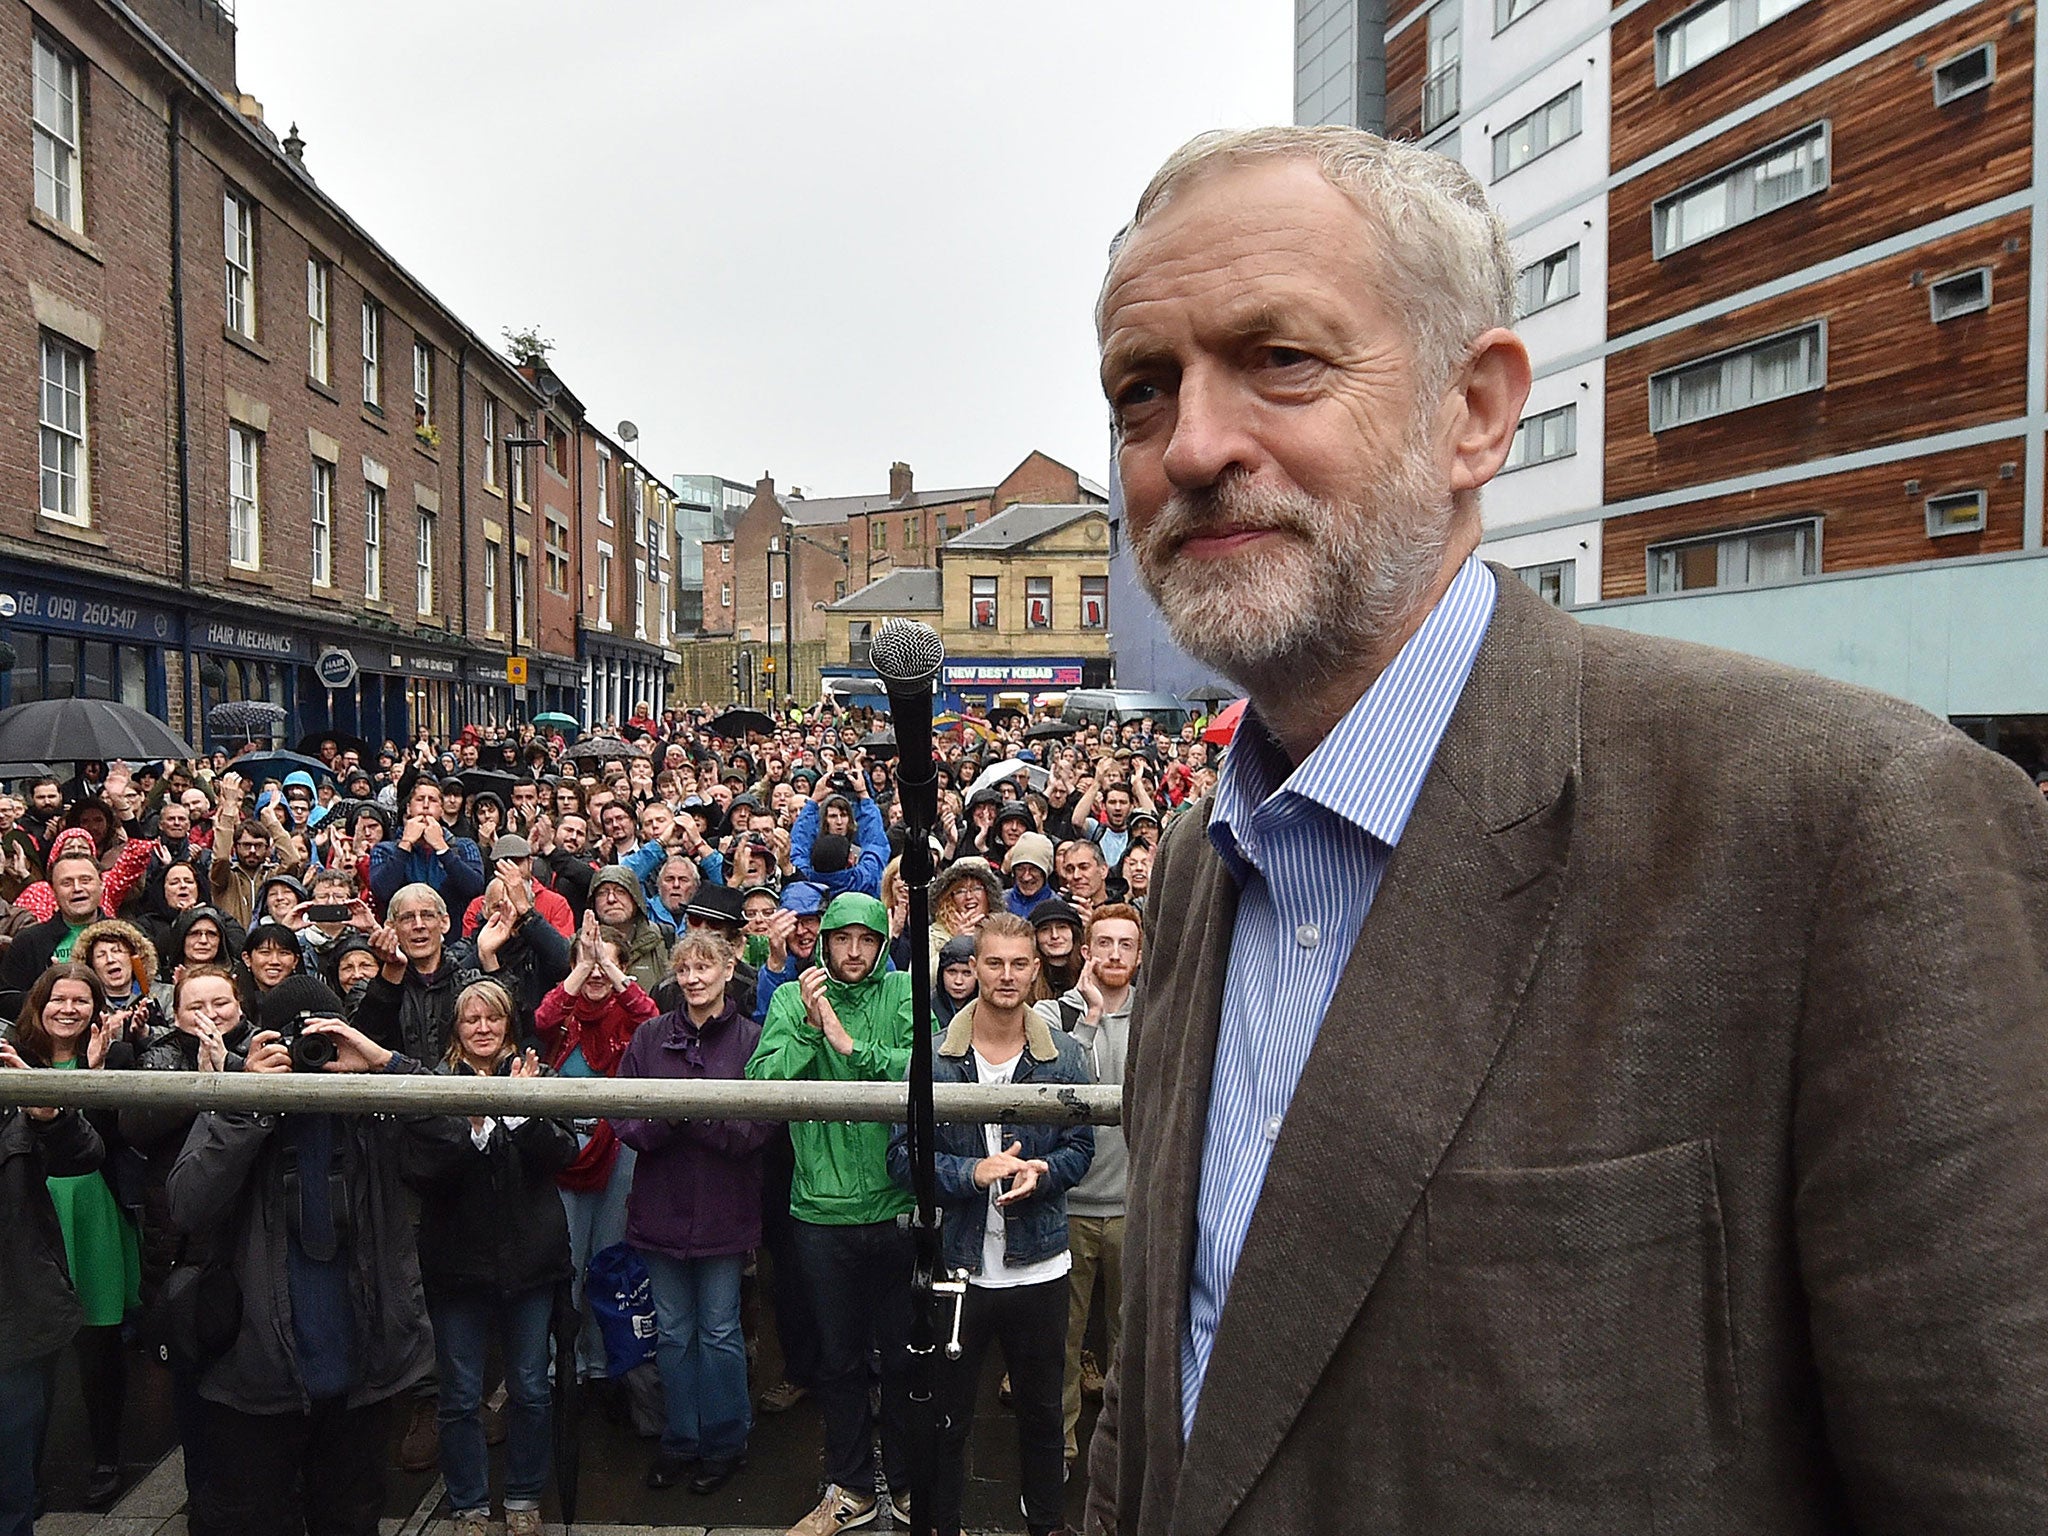 Labour leadership candidate Jeremy Corbyn speaks outside the Tyne Theatre and Opera House, Newcastle